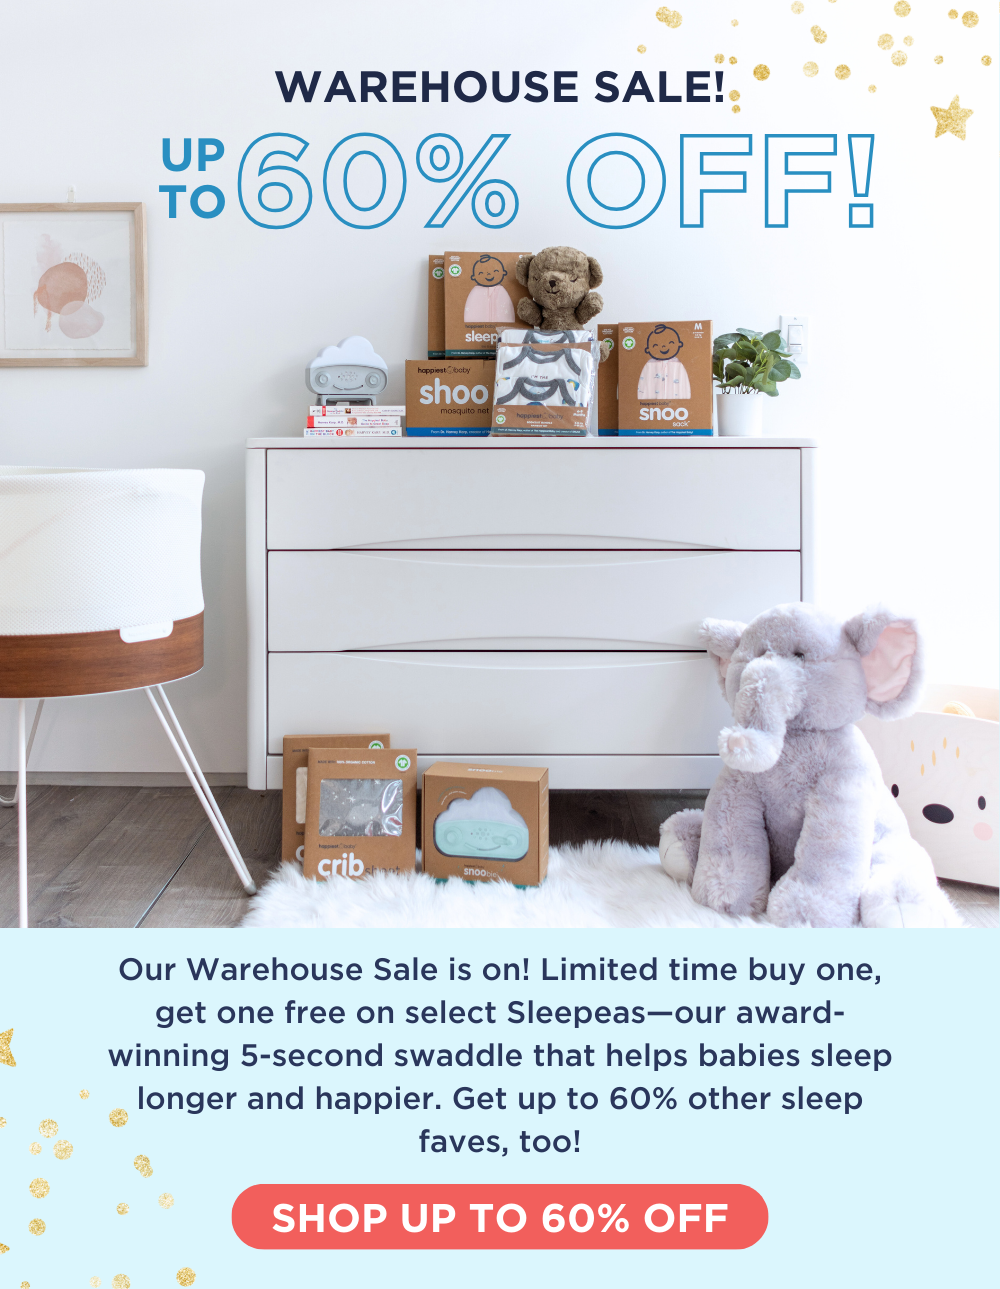 WAREHOUSE SALE! UP TO 60% OFF! Our Warehouse Sale is on! Limited time buy one, get one free on select Sleepeas—our award-winning 5-second swaddle that helps babies sleep longer and happier. Get up to 75% other sleep faves, too! SHOP UP TO 60% OFF